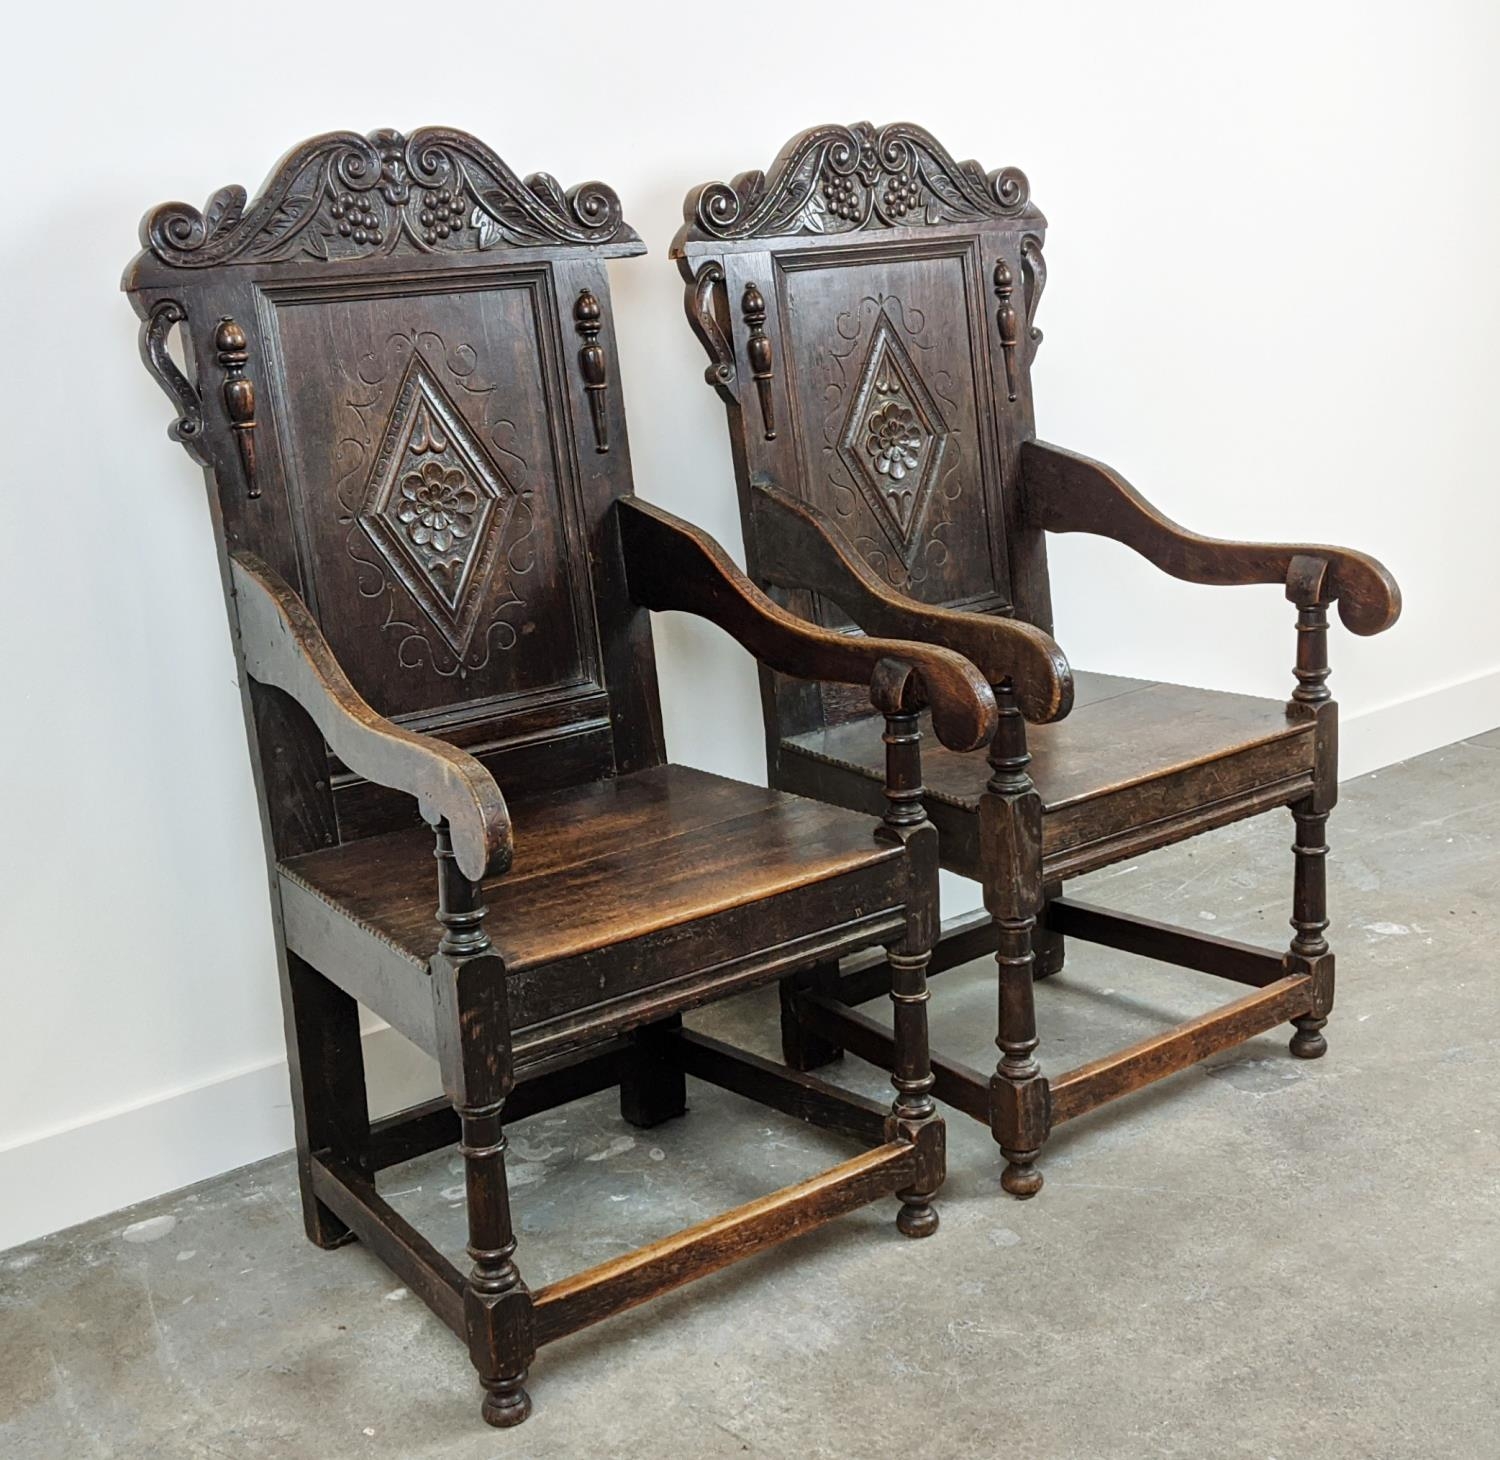 WAINSCOT ARMCHAIRS, a pair, late 19th century Carolean style oak with carved backs, 119cm H x 61cm x - Image 2 of 9